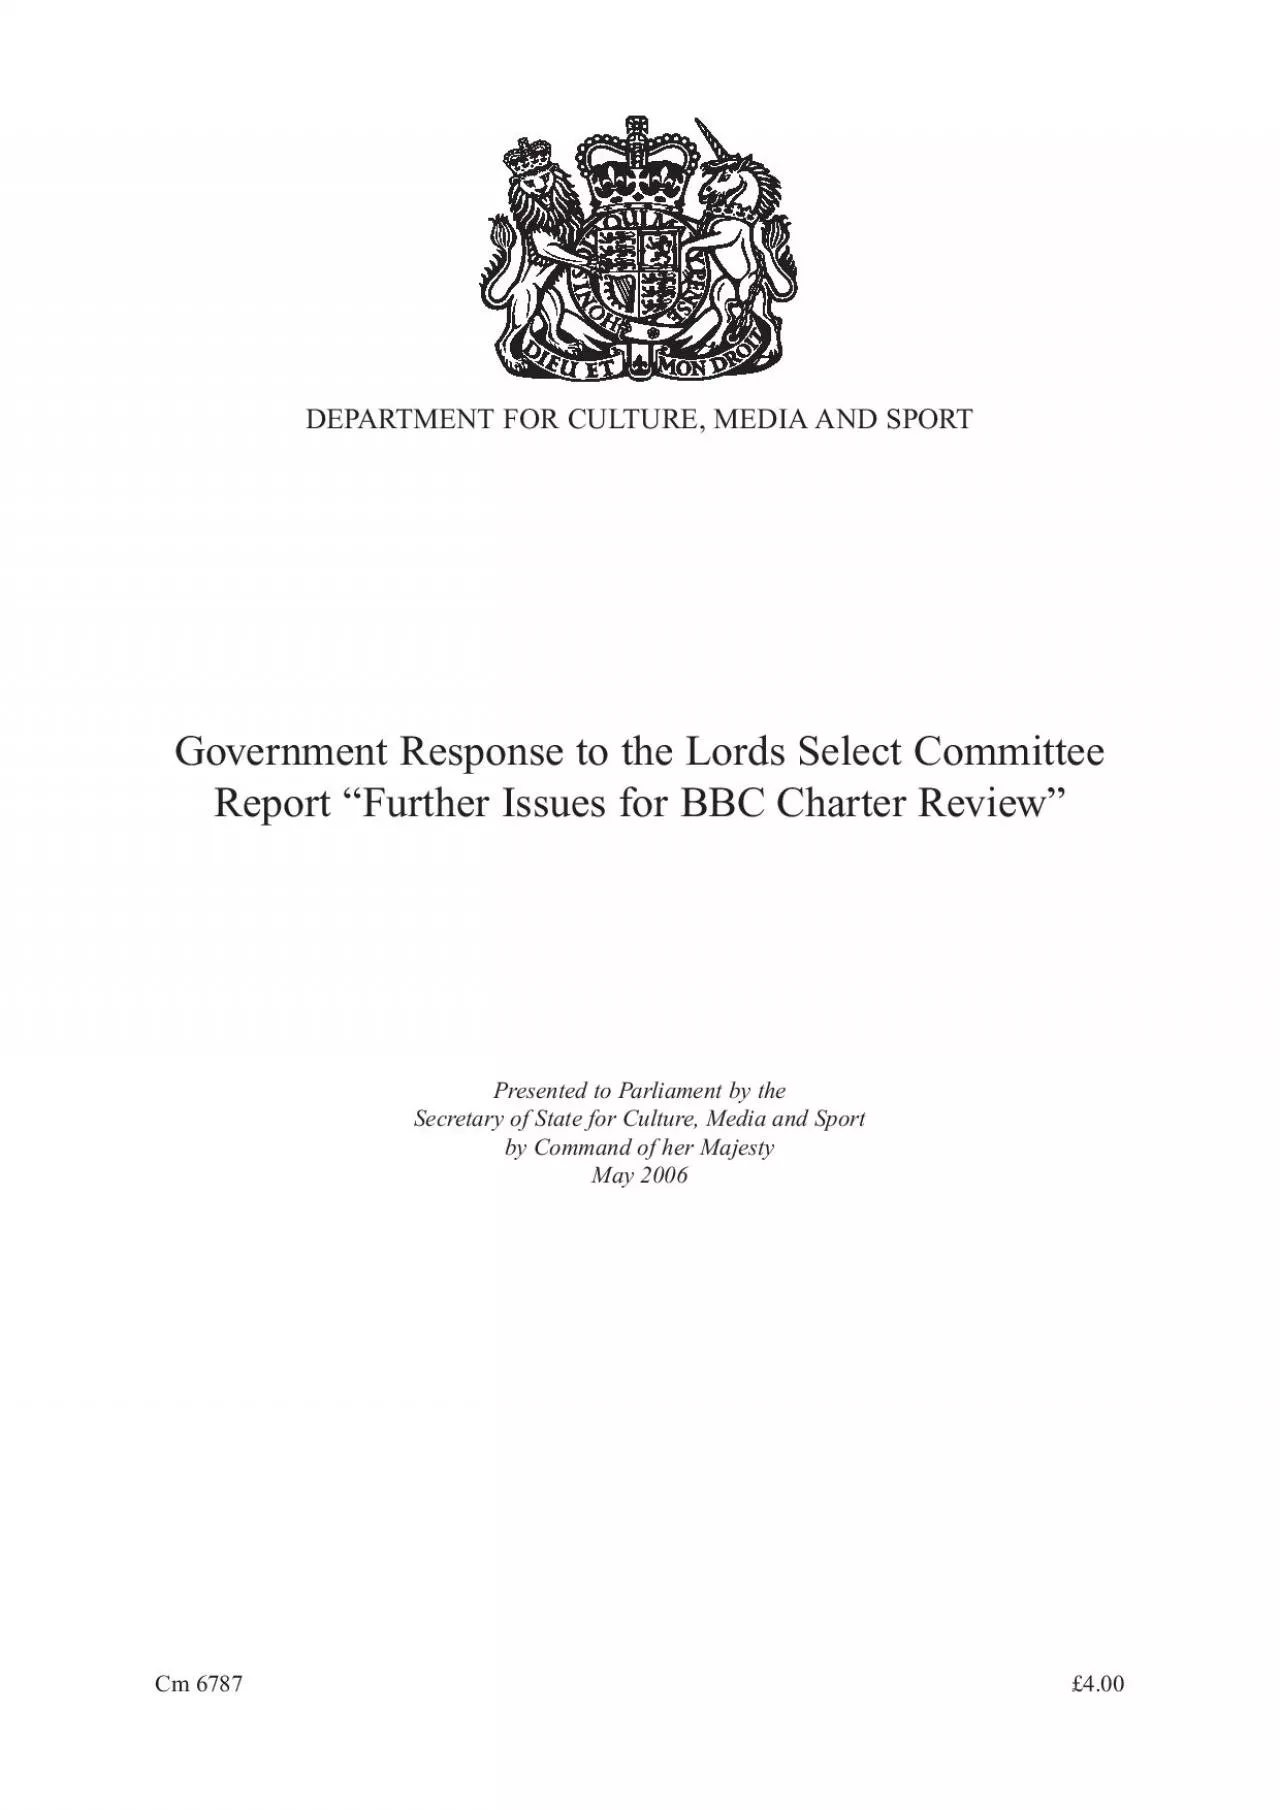 GOVERNMENT RESPONSE TO THE LORDS SELECTCOMMITTEE REPORT FURTHER ISSUE